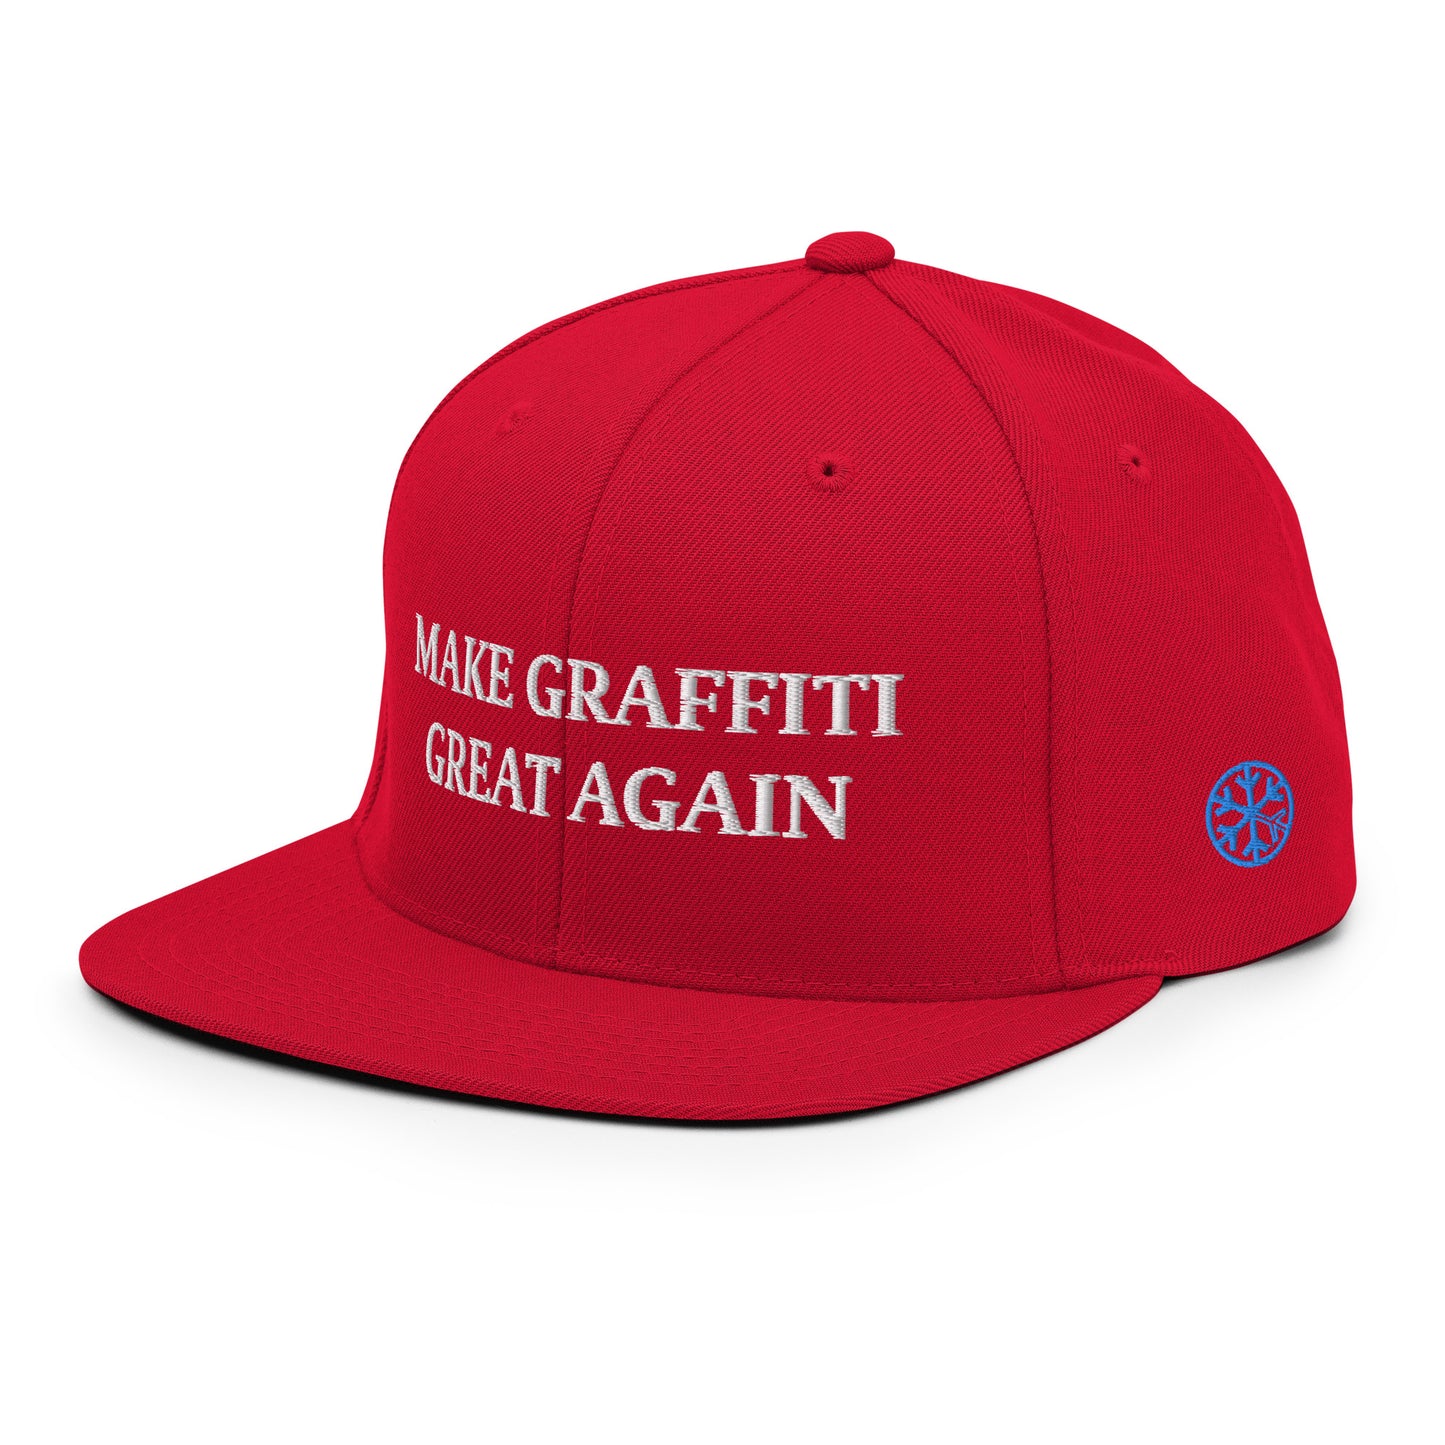 3/4 of make graffiti great again snapback red by b.different clothing graffiti and street art inspired streetwear brand for weirdos, misfits, and outcasts.